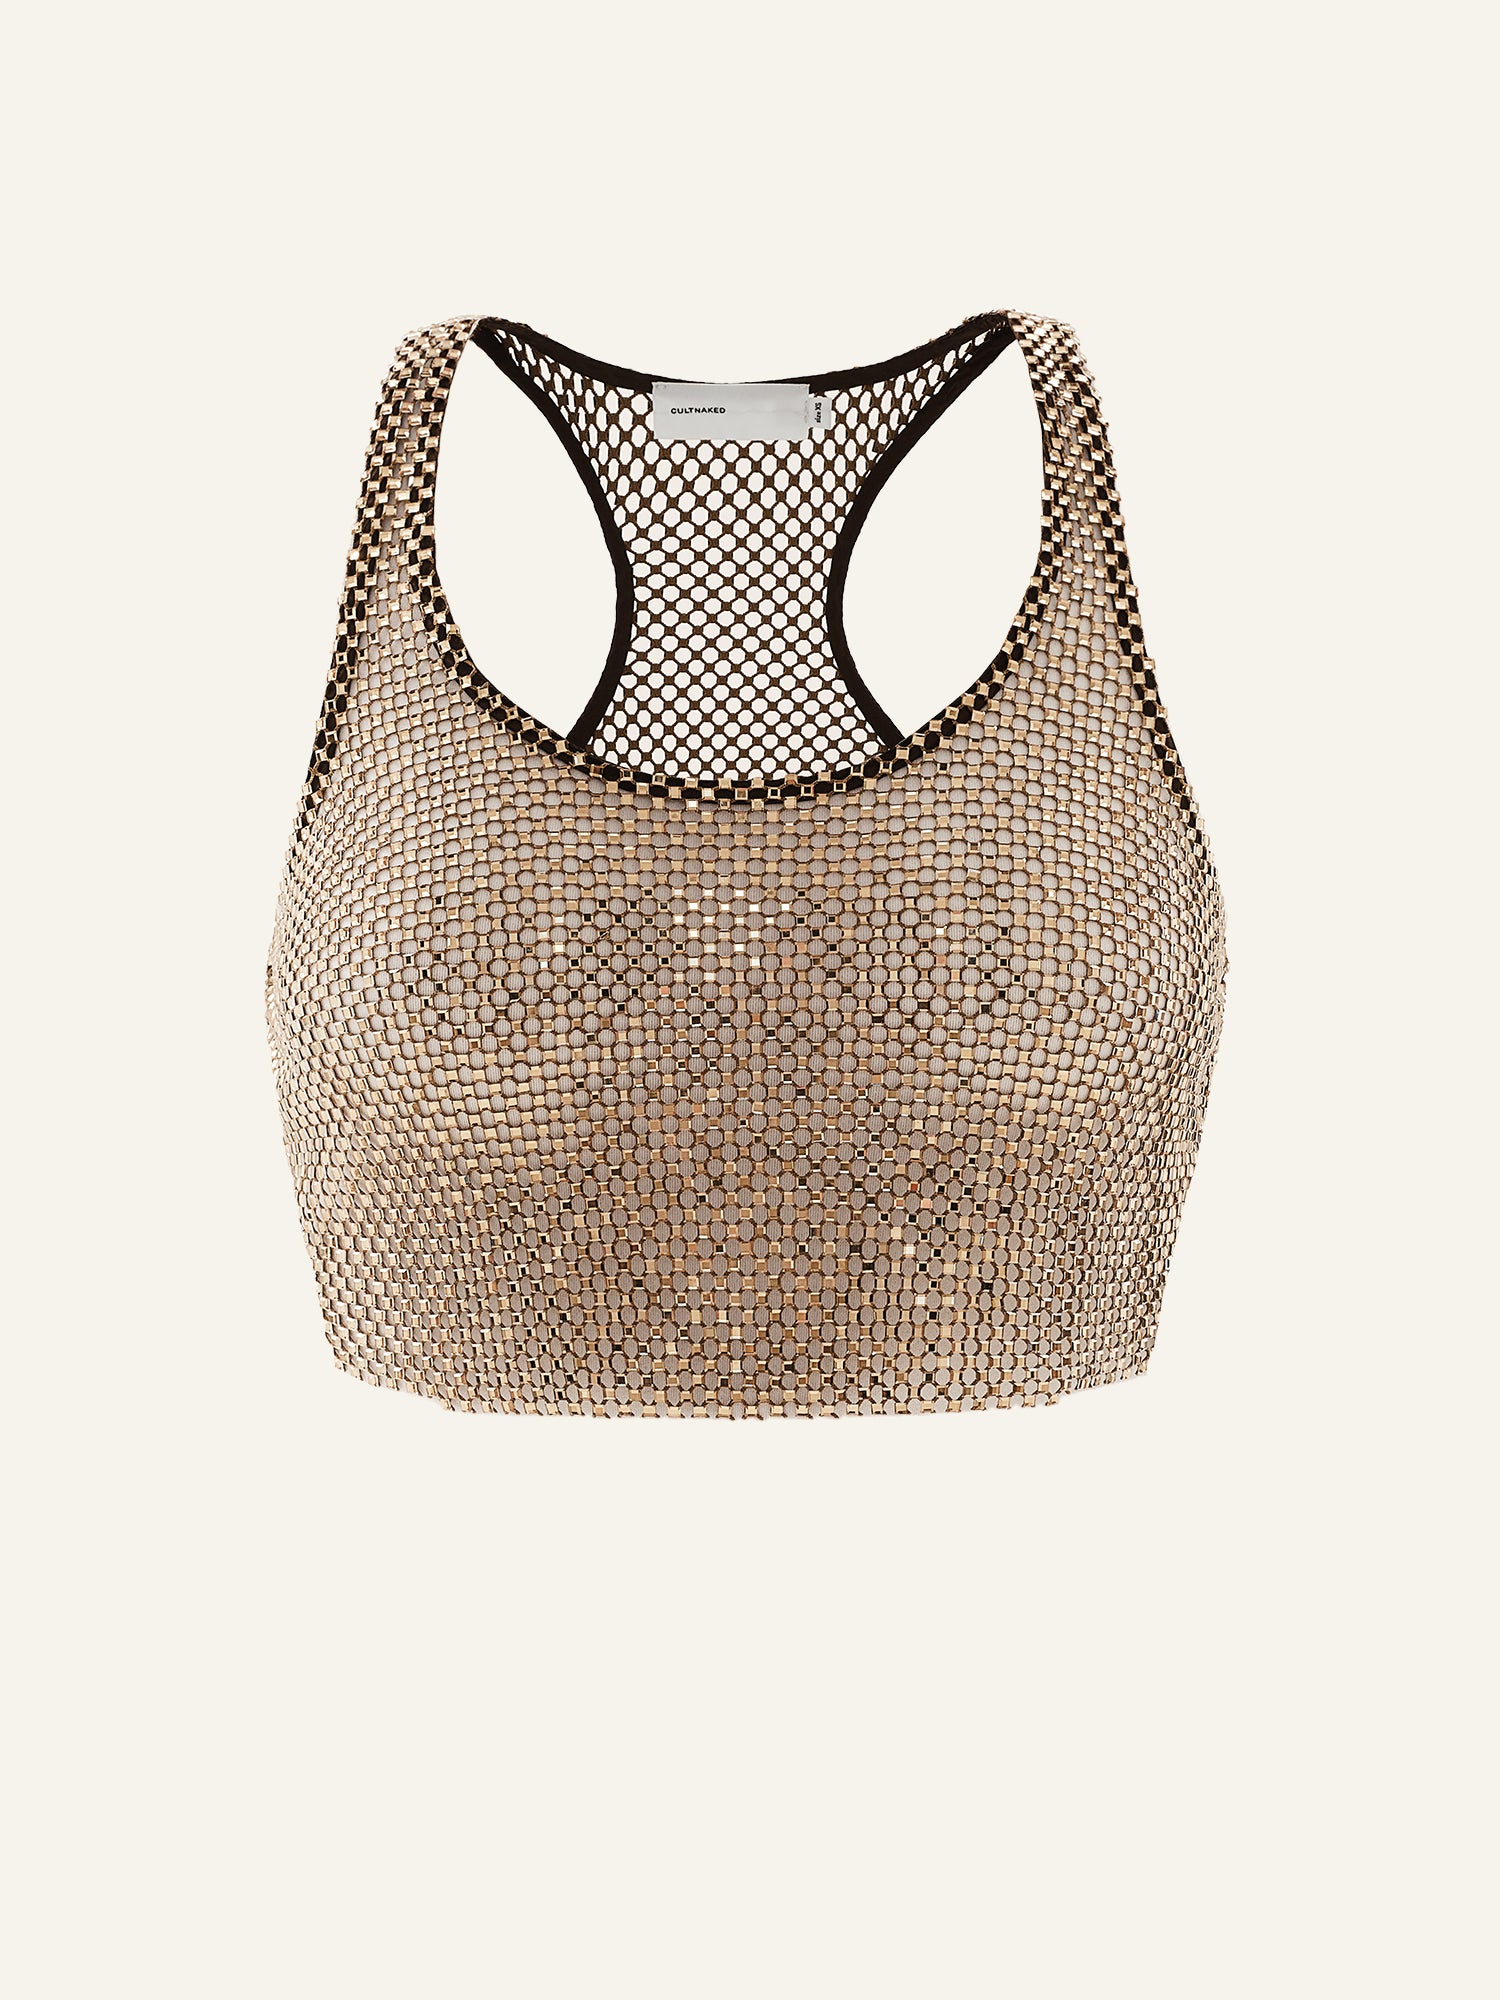 Product photo of a brown net cropped tank top decorated with rhinestones